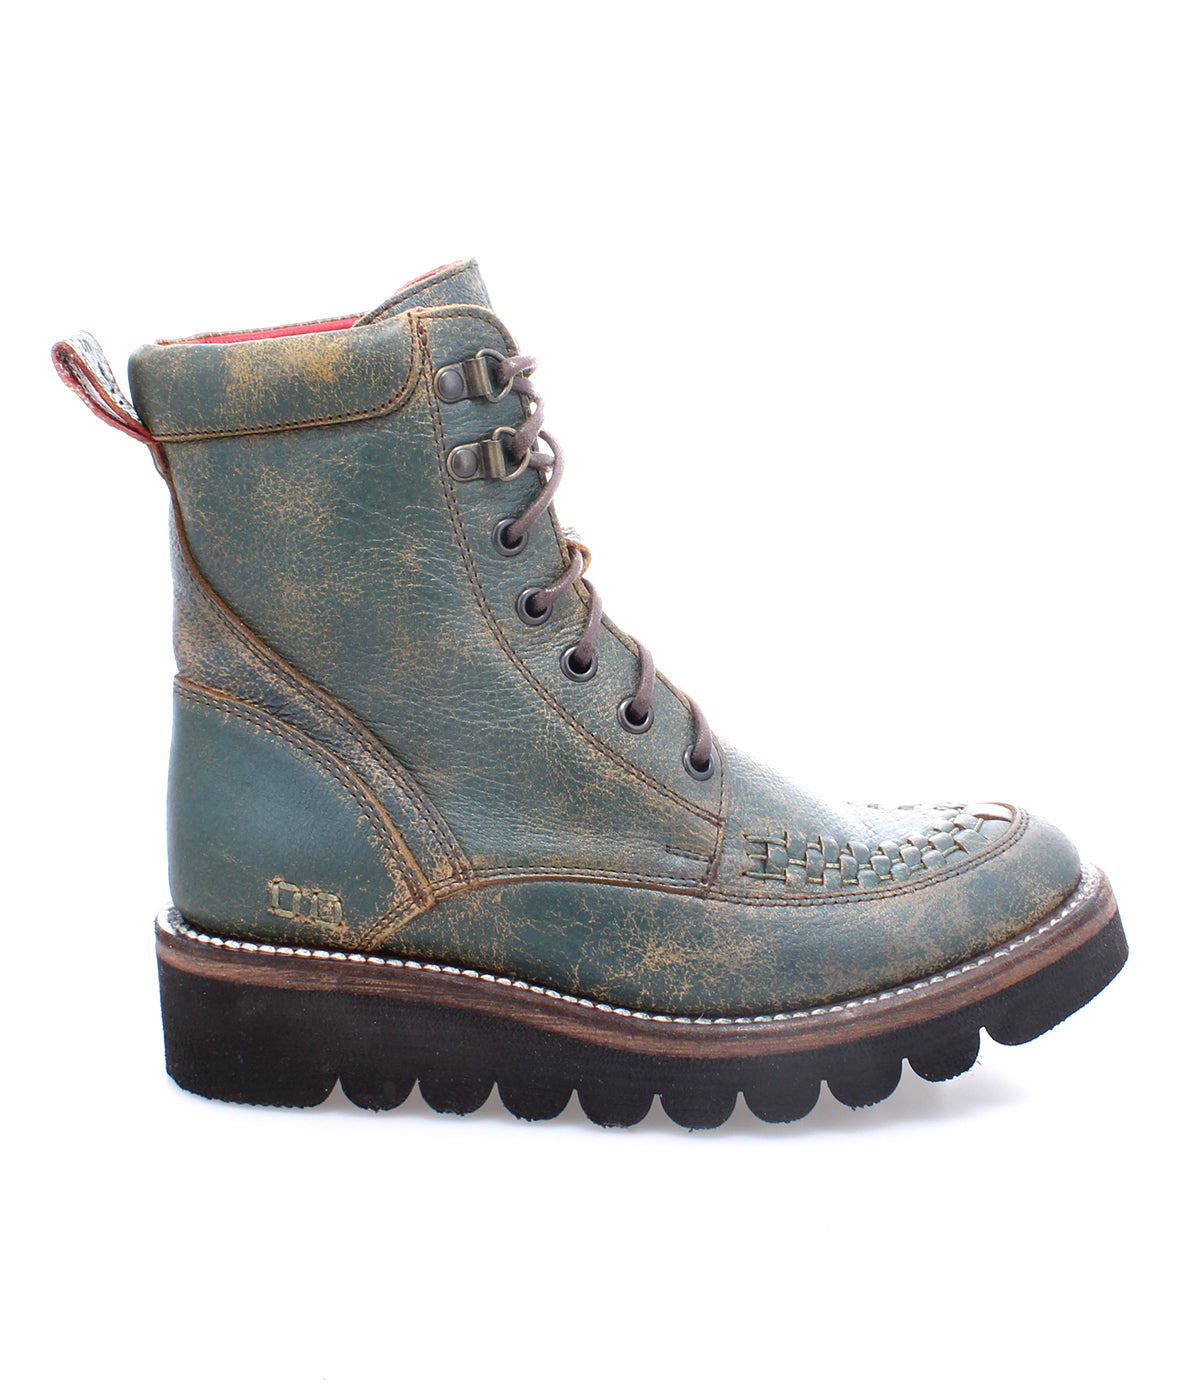 A women's Elisha II boot by Bed Stu, with a black sole.